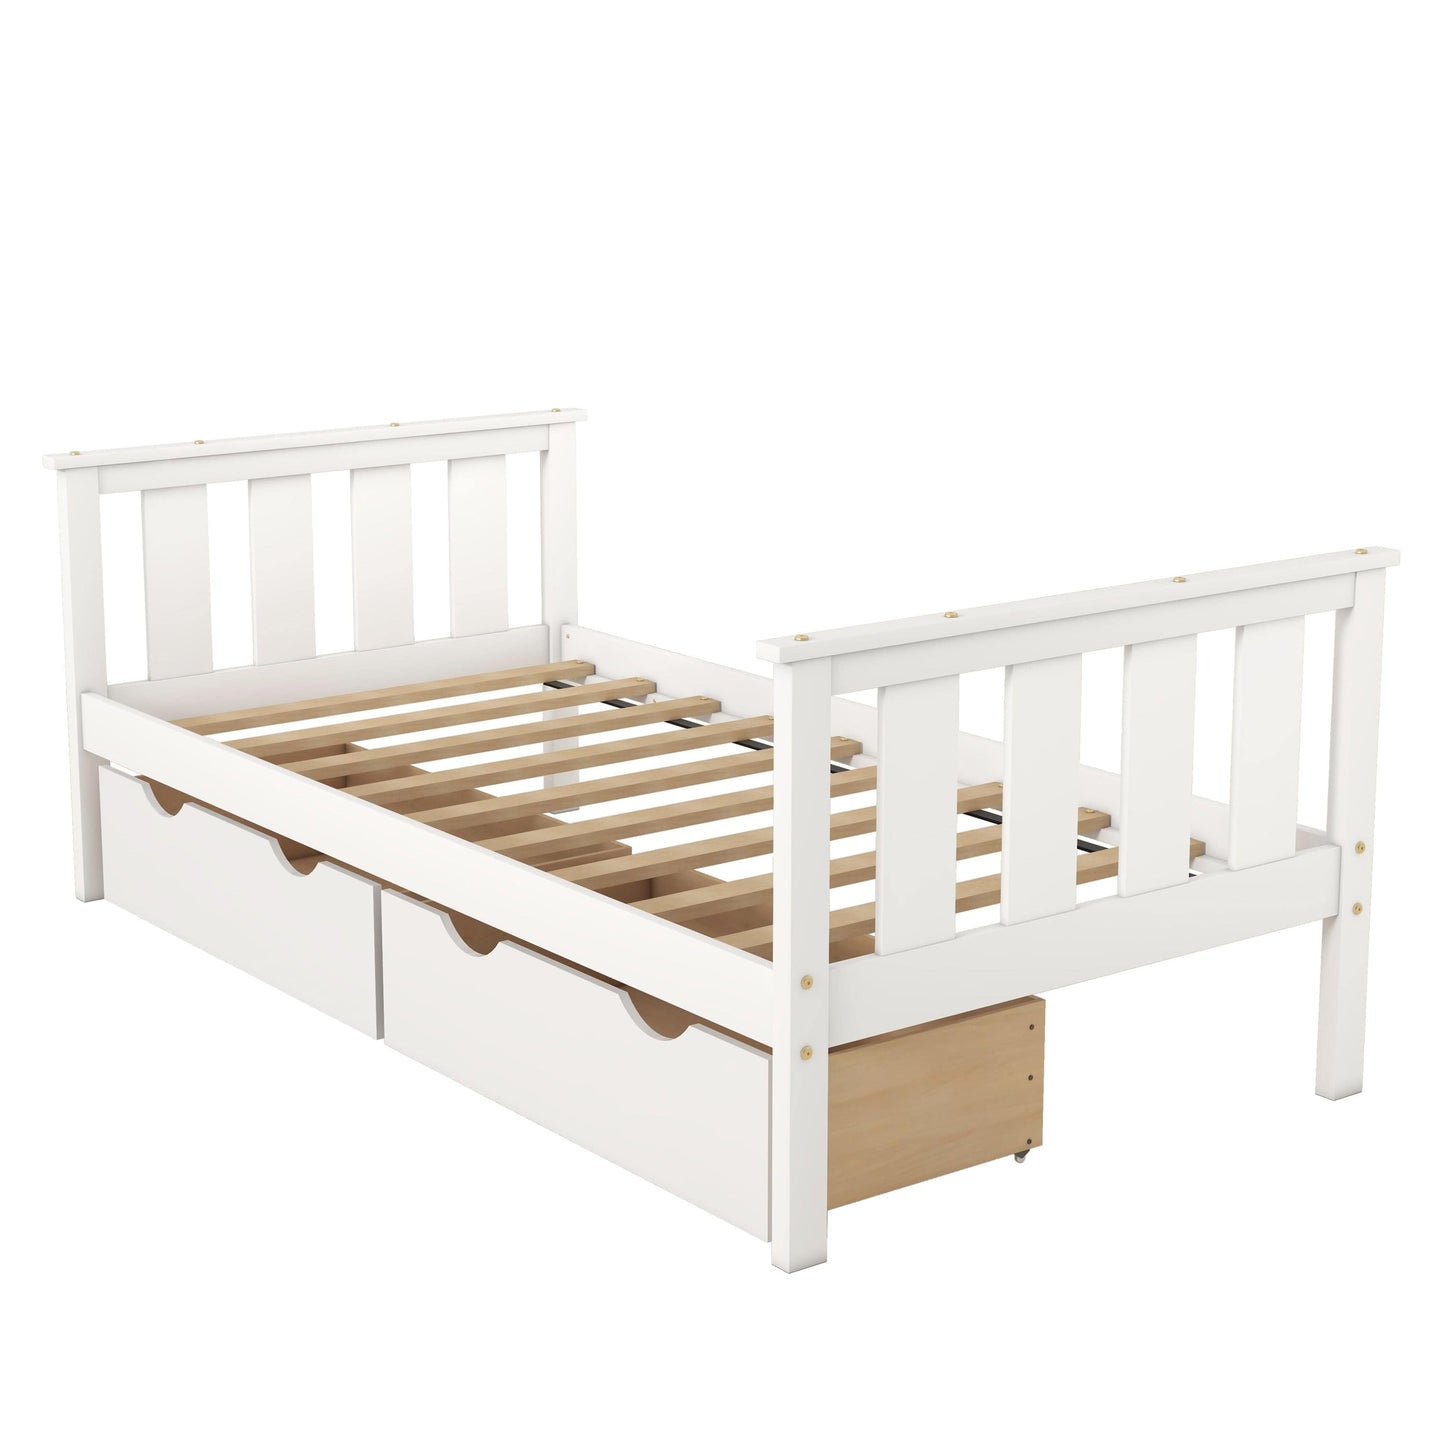 1st Choice Furniture Direct Beds & Bed Frames 1st Choice White Twin Platform Bed with Storage Drawers